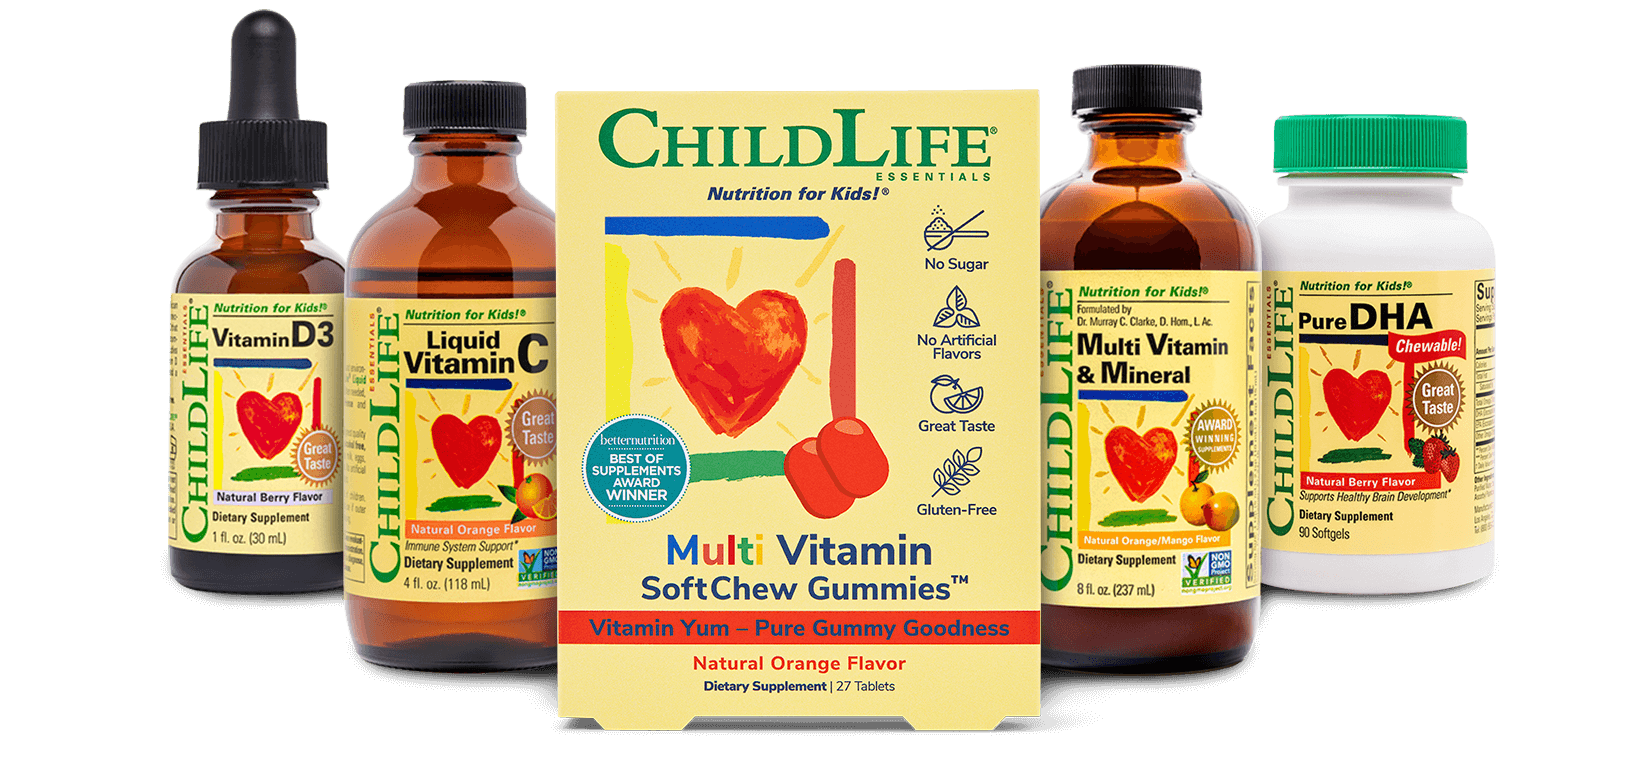 childlife nutrition best vitamins and mineral supplements for kids